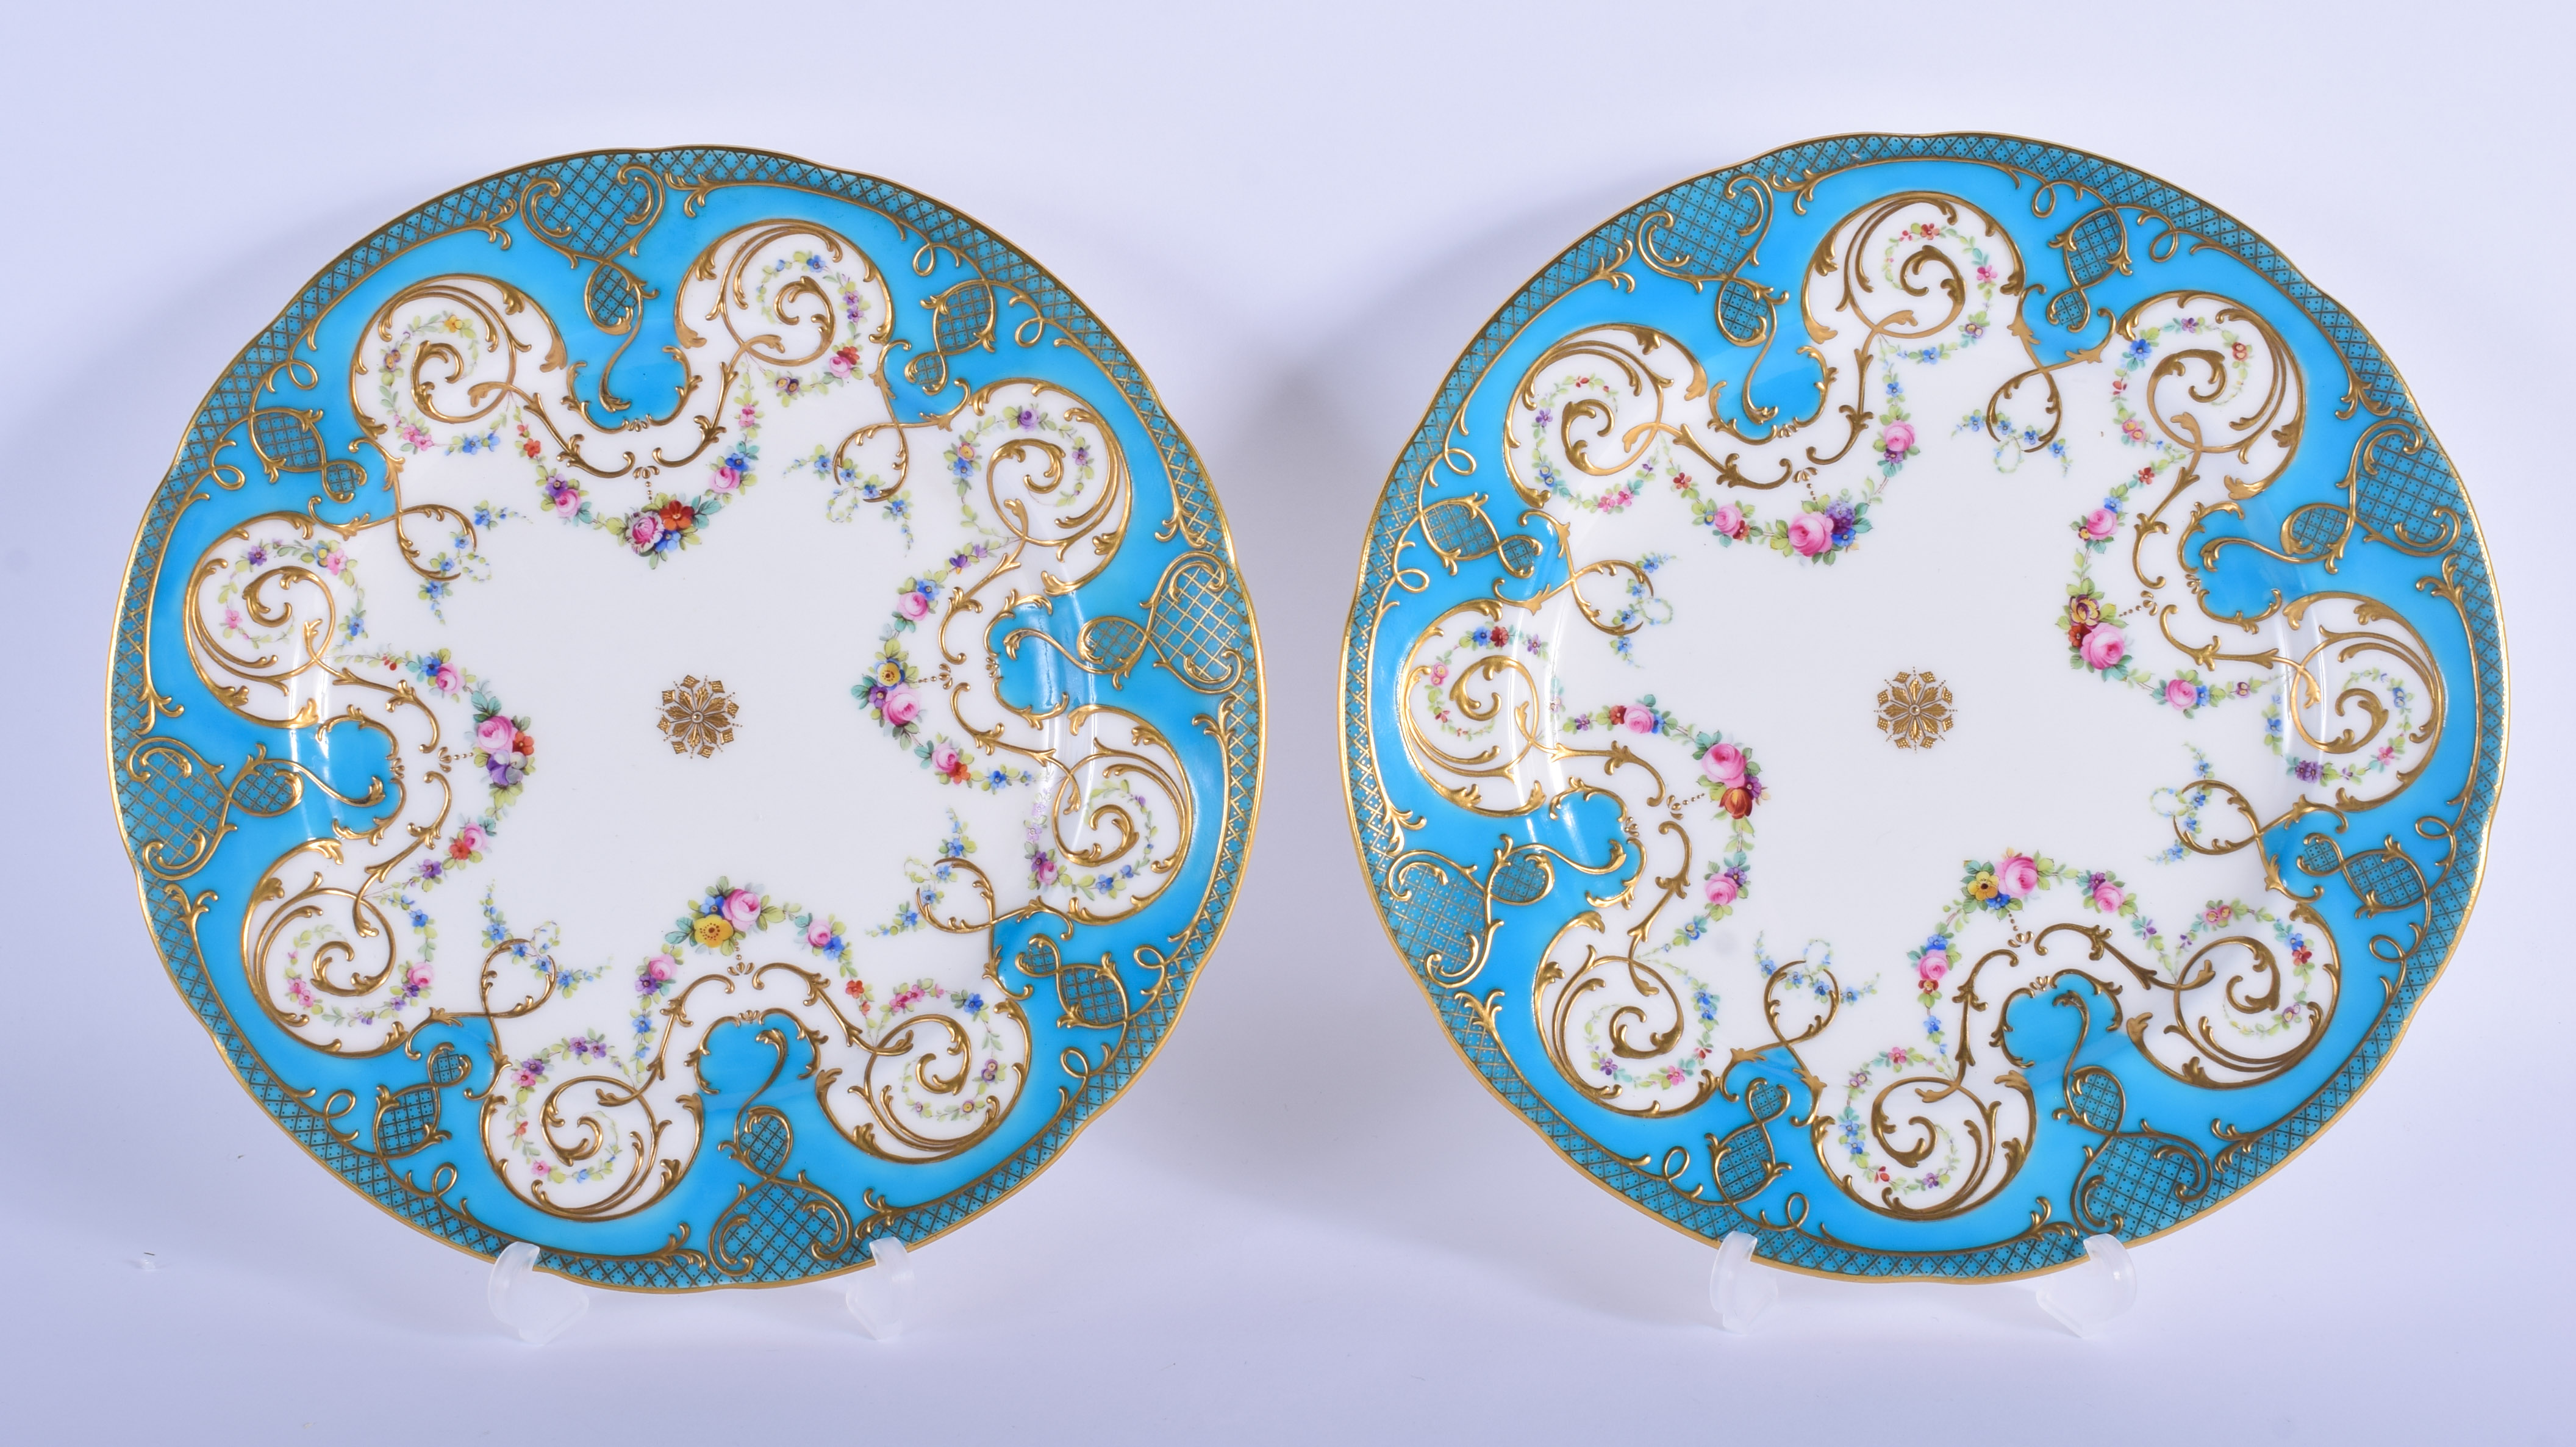 19th c. Minton Sevres style pair of plates painted with chains of flowers under a turquoise and gil